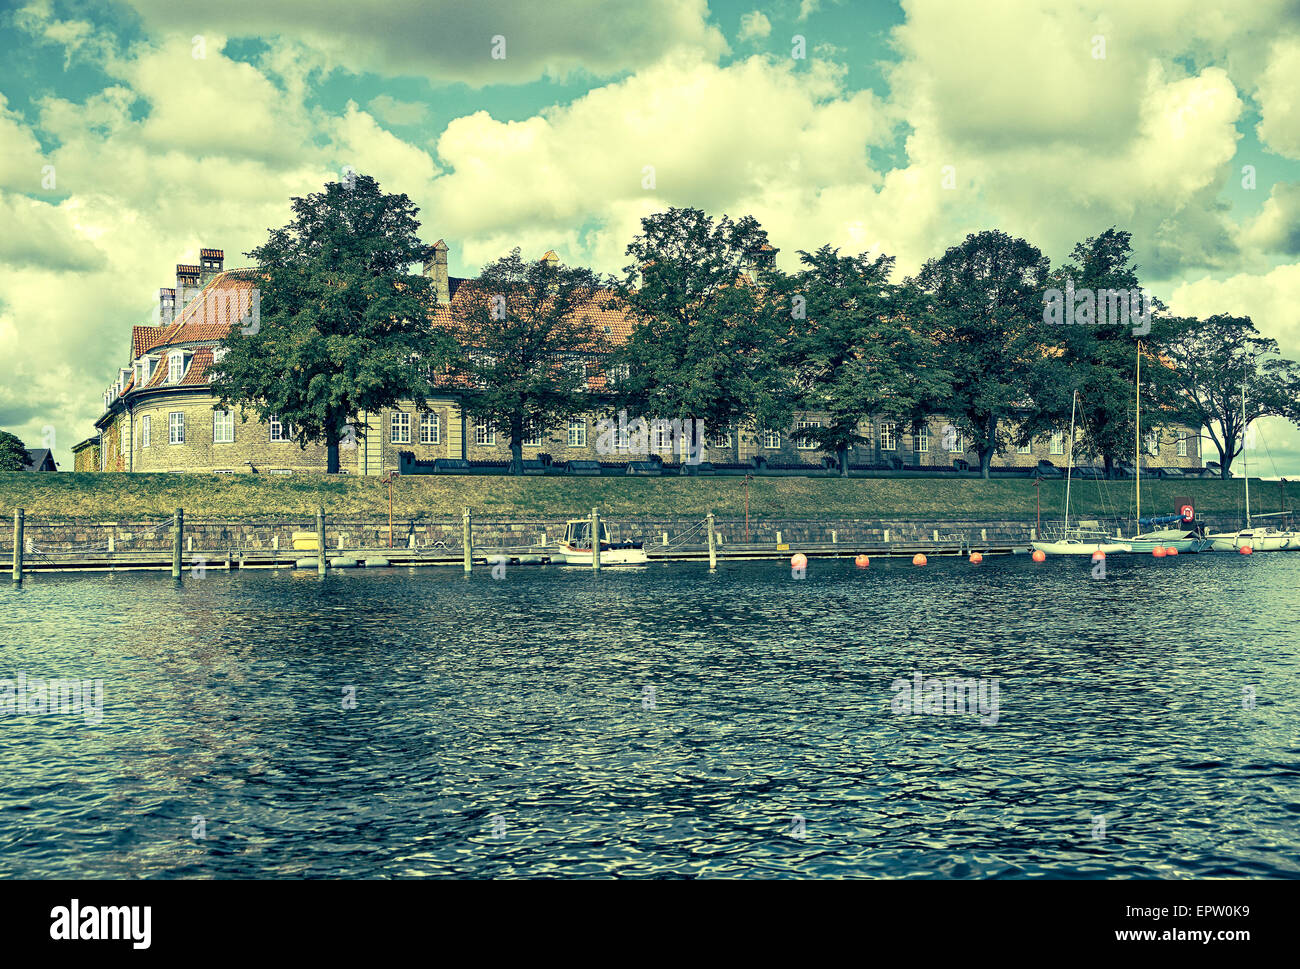 The red roof house. The viev from the channel Holmen. Copenhagen. Denmark. Vintage color style toned image. Stock Photo